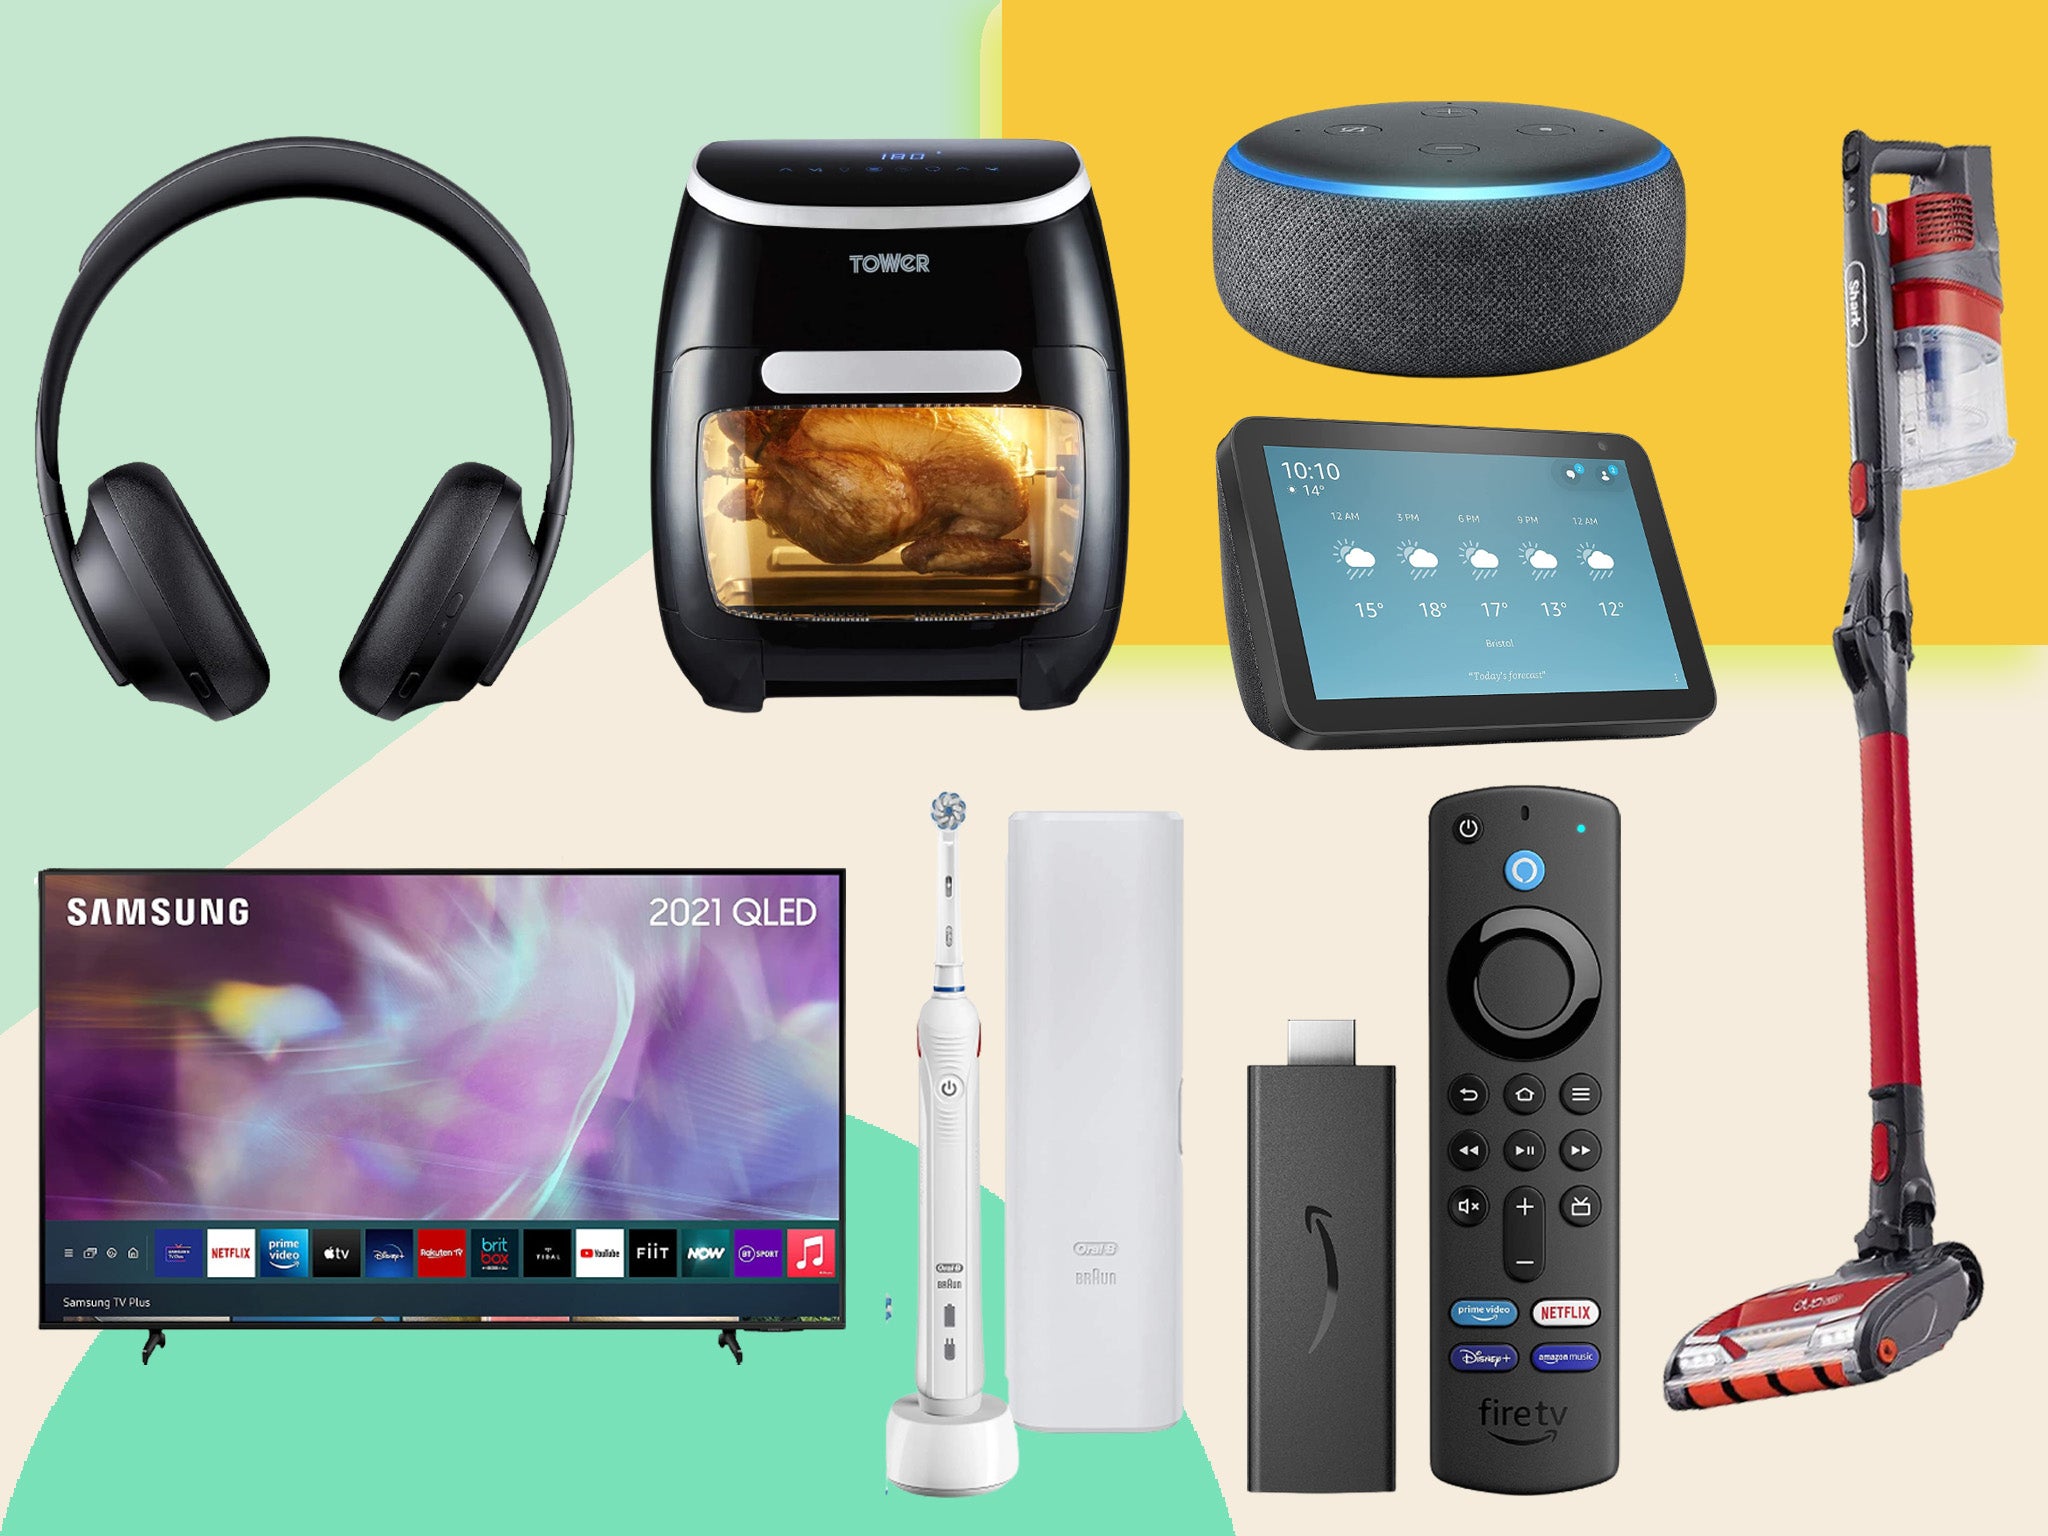 The shopping event includes savings on homeware, tech, toys and more